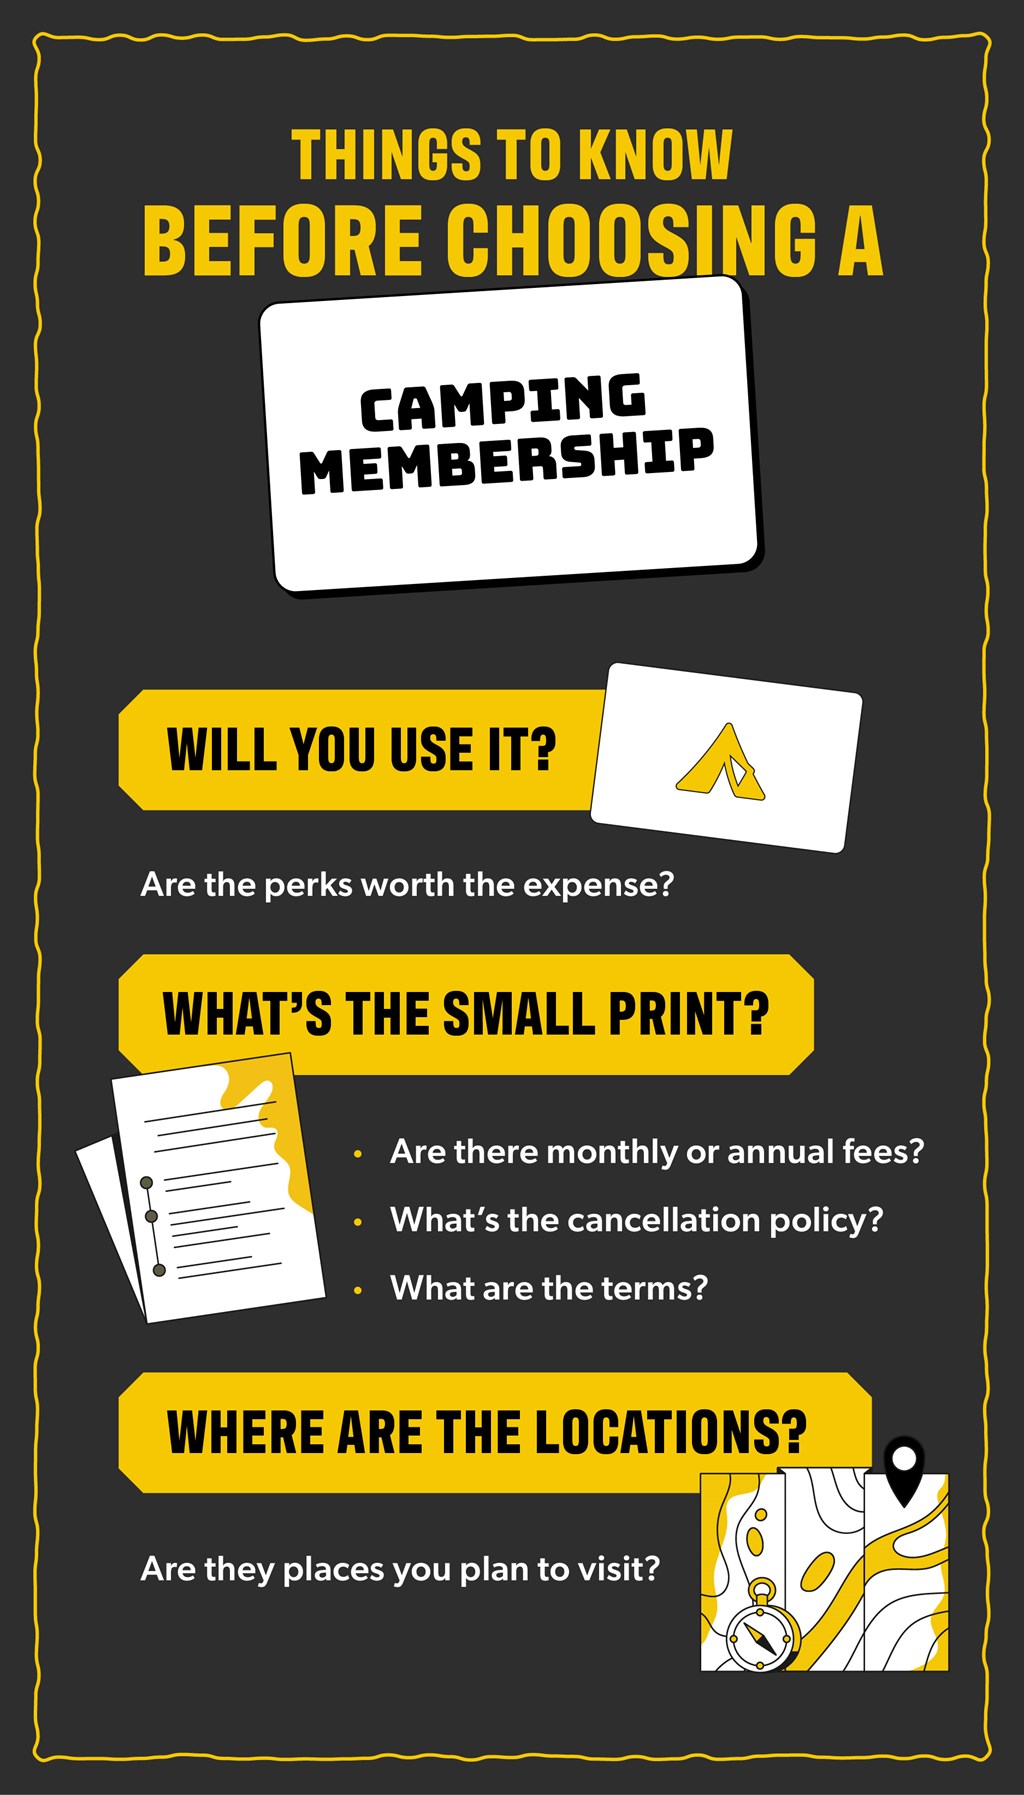 A micrographic outlining how to pick a camping membership. You should consider if you'll use it, what the fees and restrictions are, and the locations where you can utilize it.